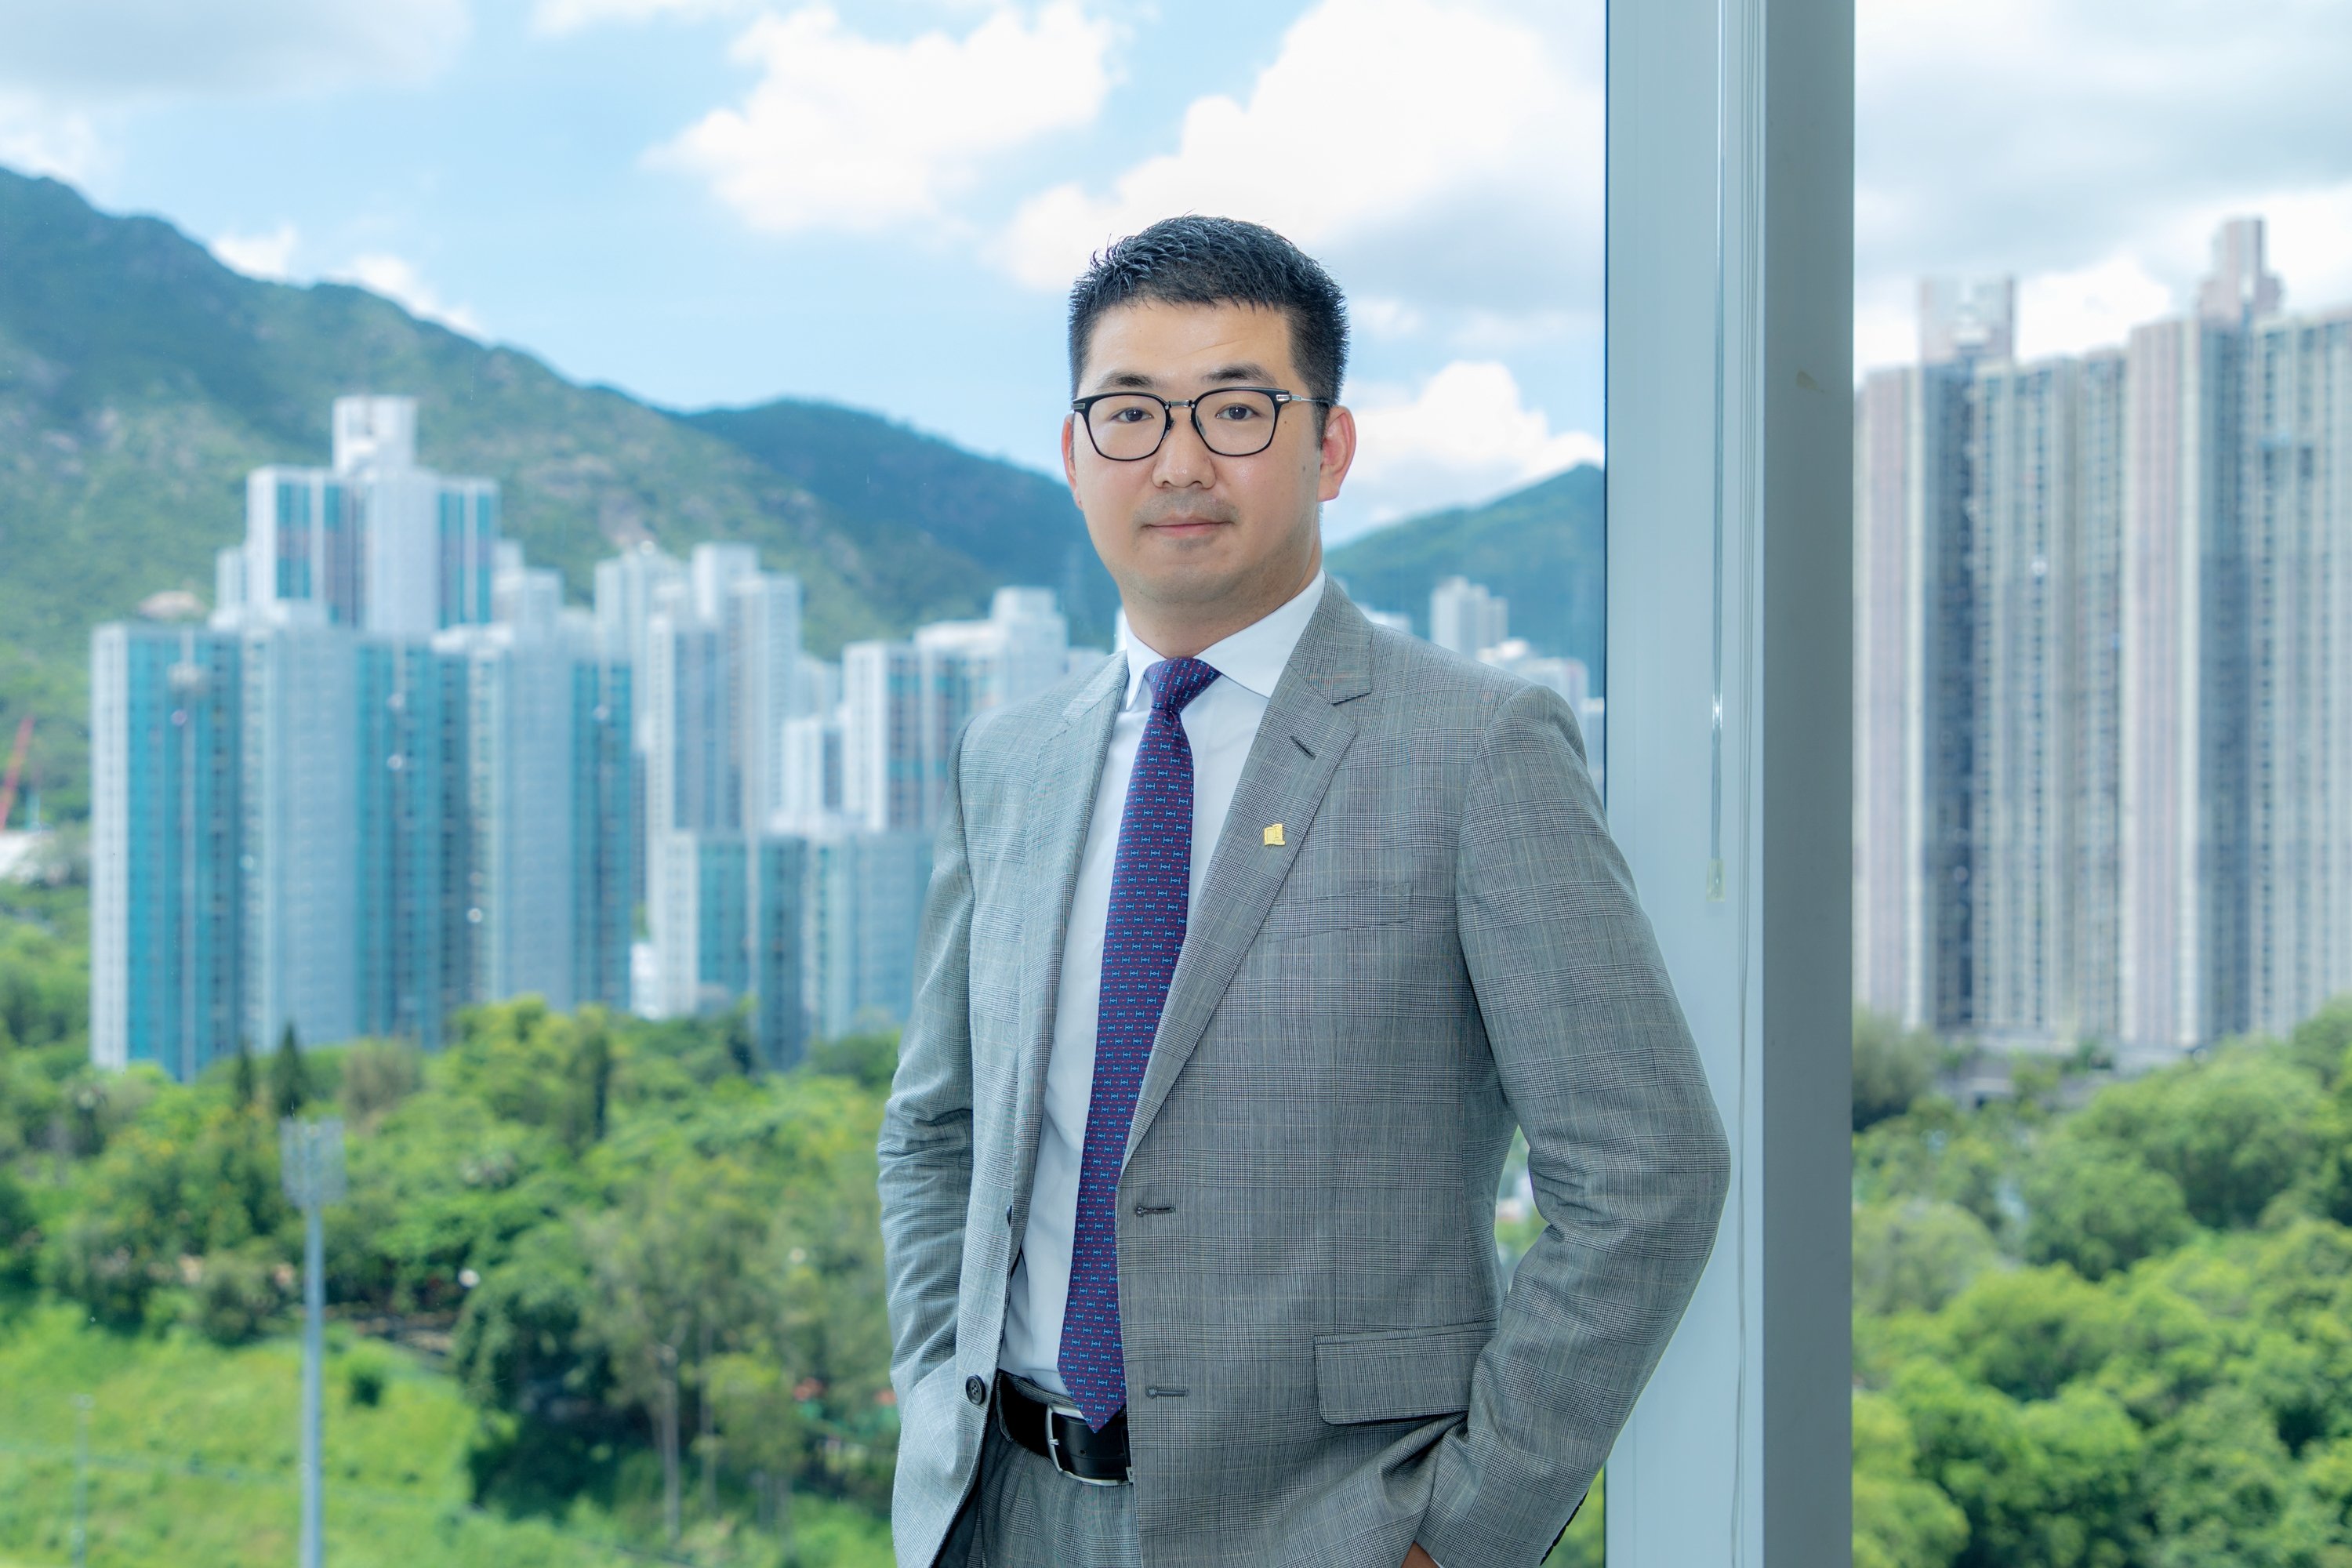 Professor Gao Meng, Professor of the Department of Geography at HKBU, hopes the statistical model which predicts summertime co-occurrence of heat wave and air pollution in China can help mitigate damage from the joint hazards.